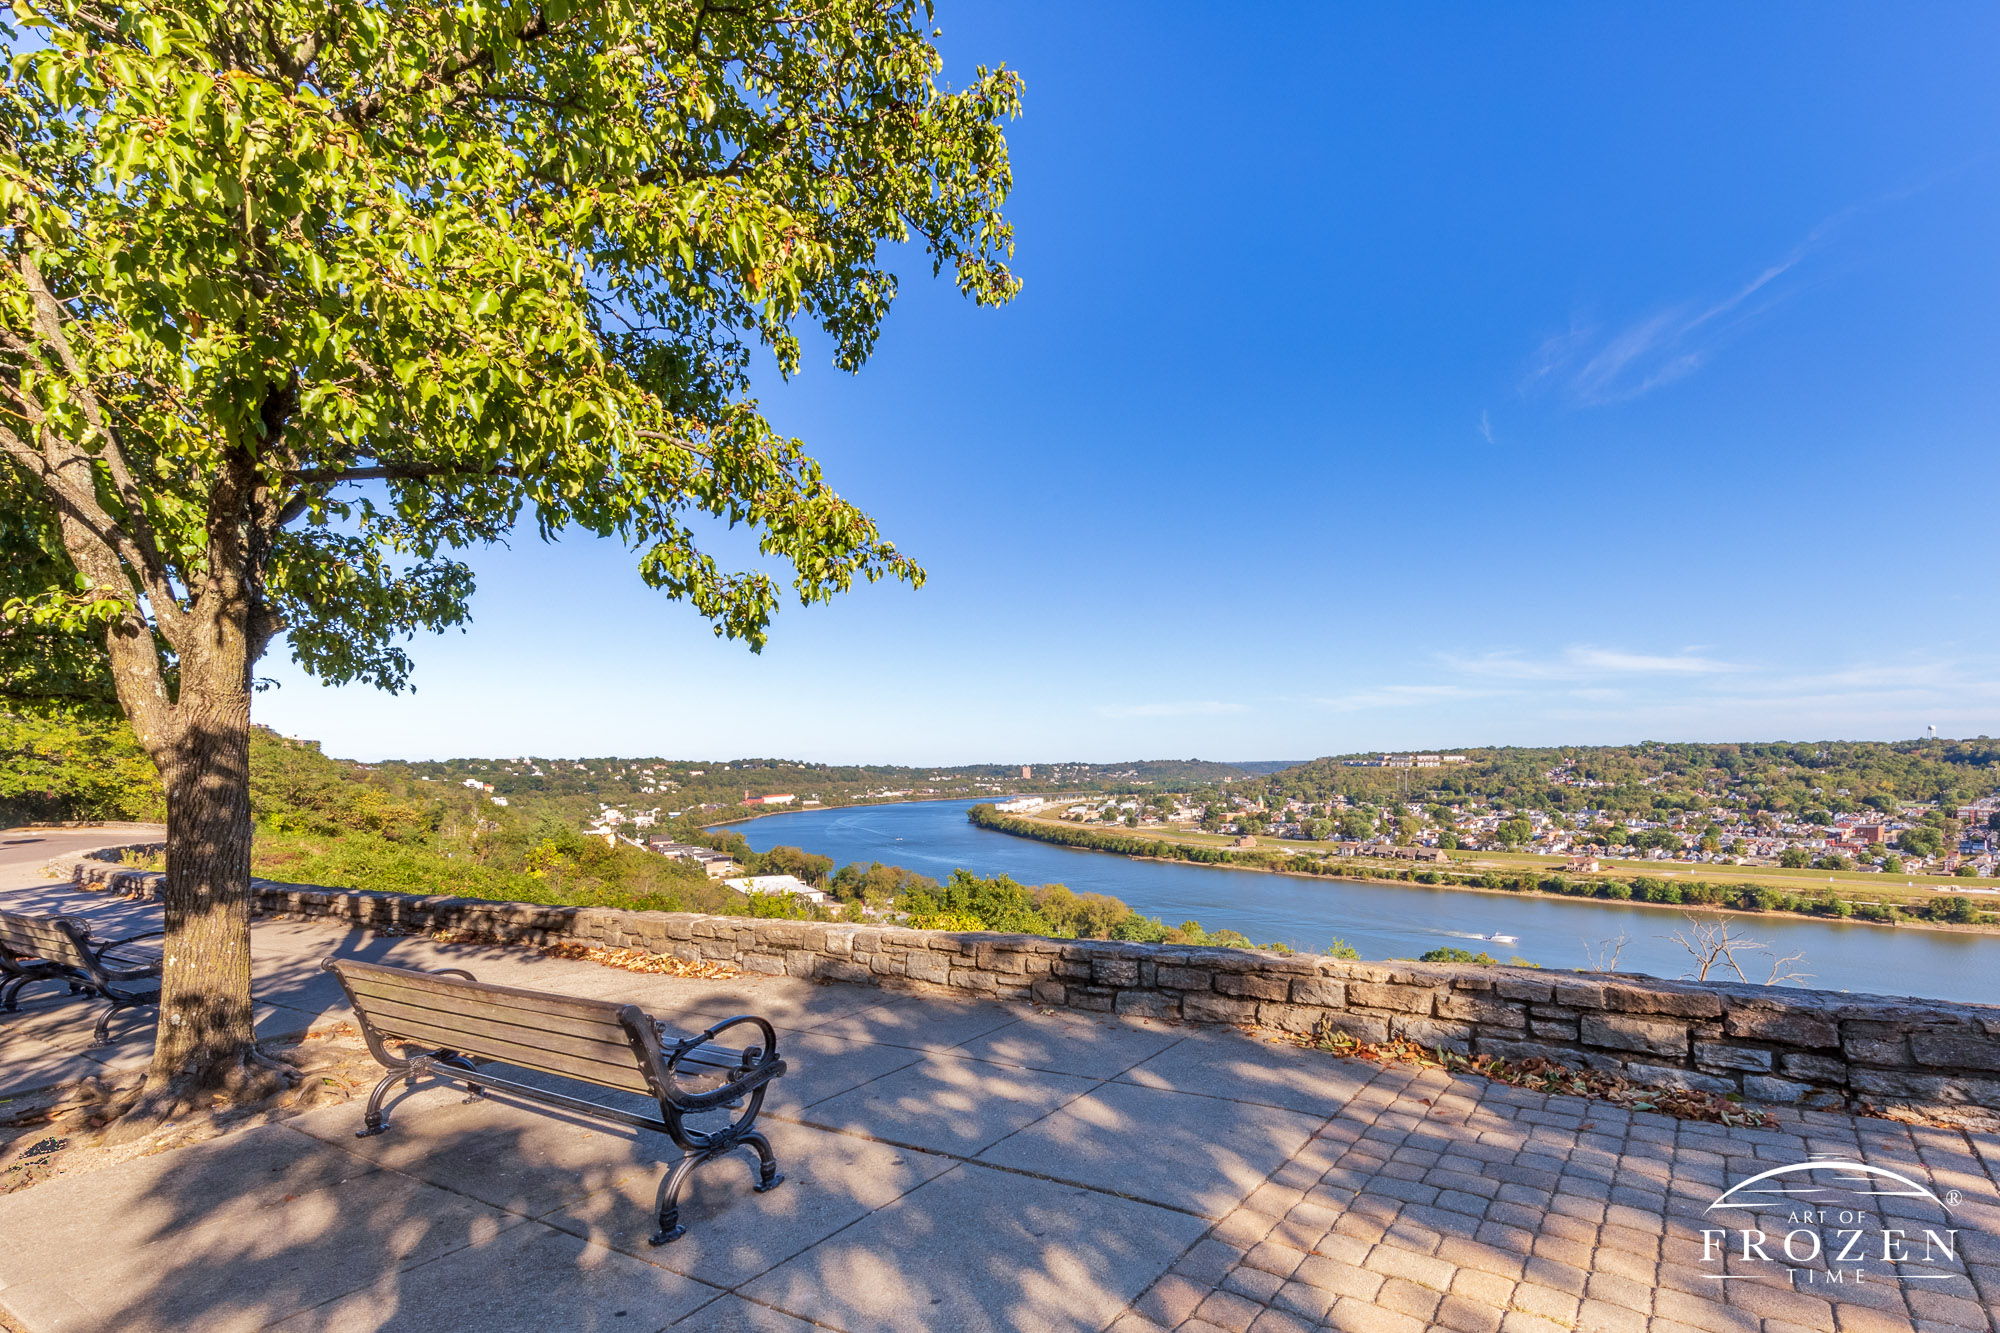 A stunning view from Twin Lake Overlook in Eden Park gives Cincinnati visitors a panoramic vista of the Ohio River and northern Kentucky